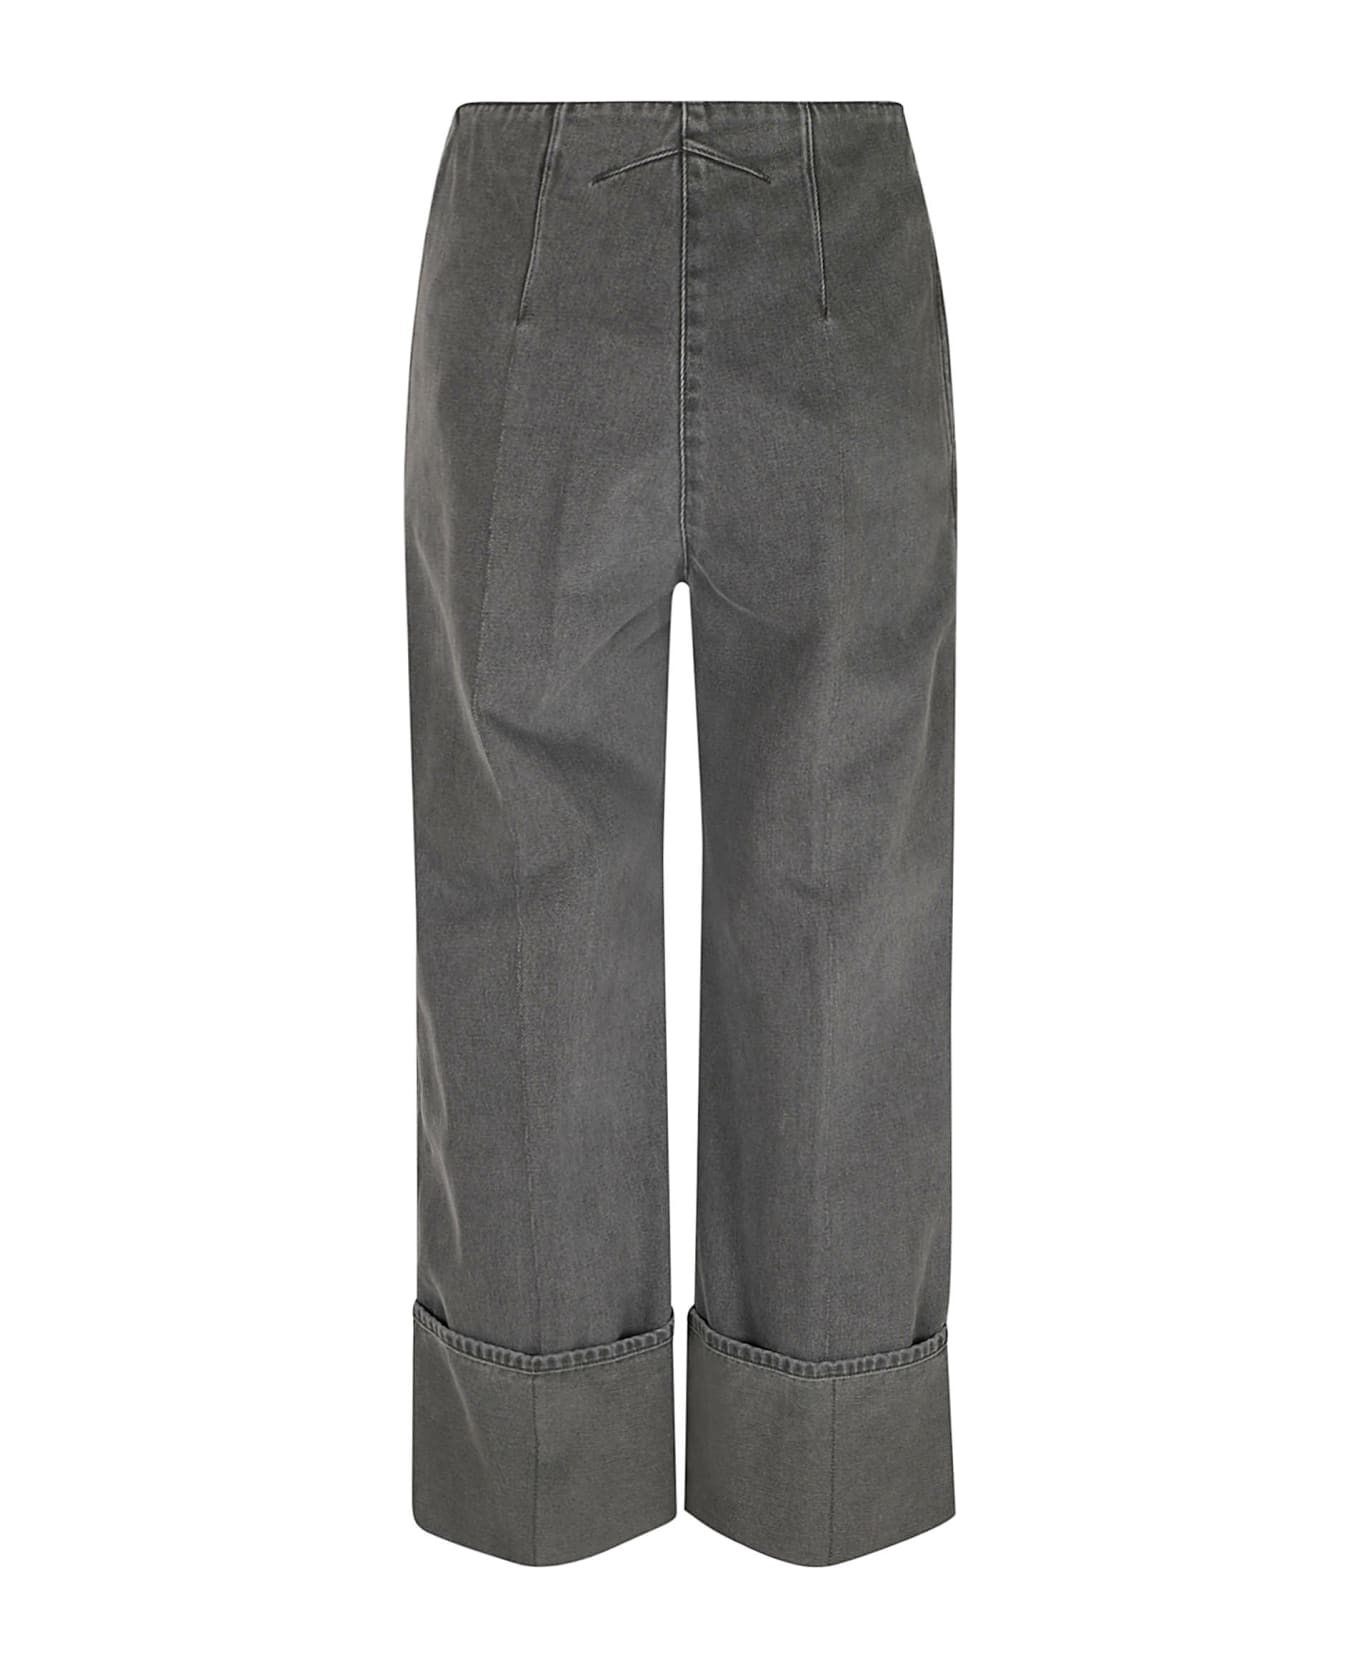 Patou Denim Iconic Trousers - Anthracite